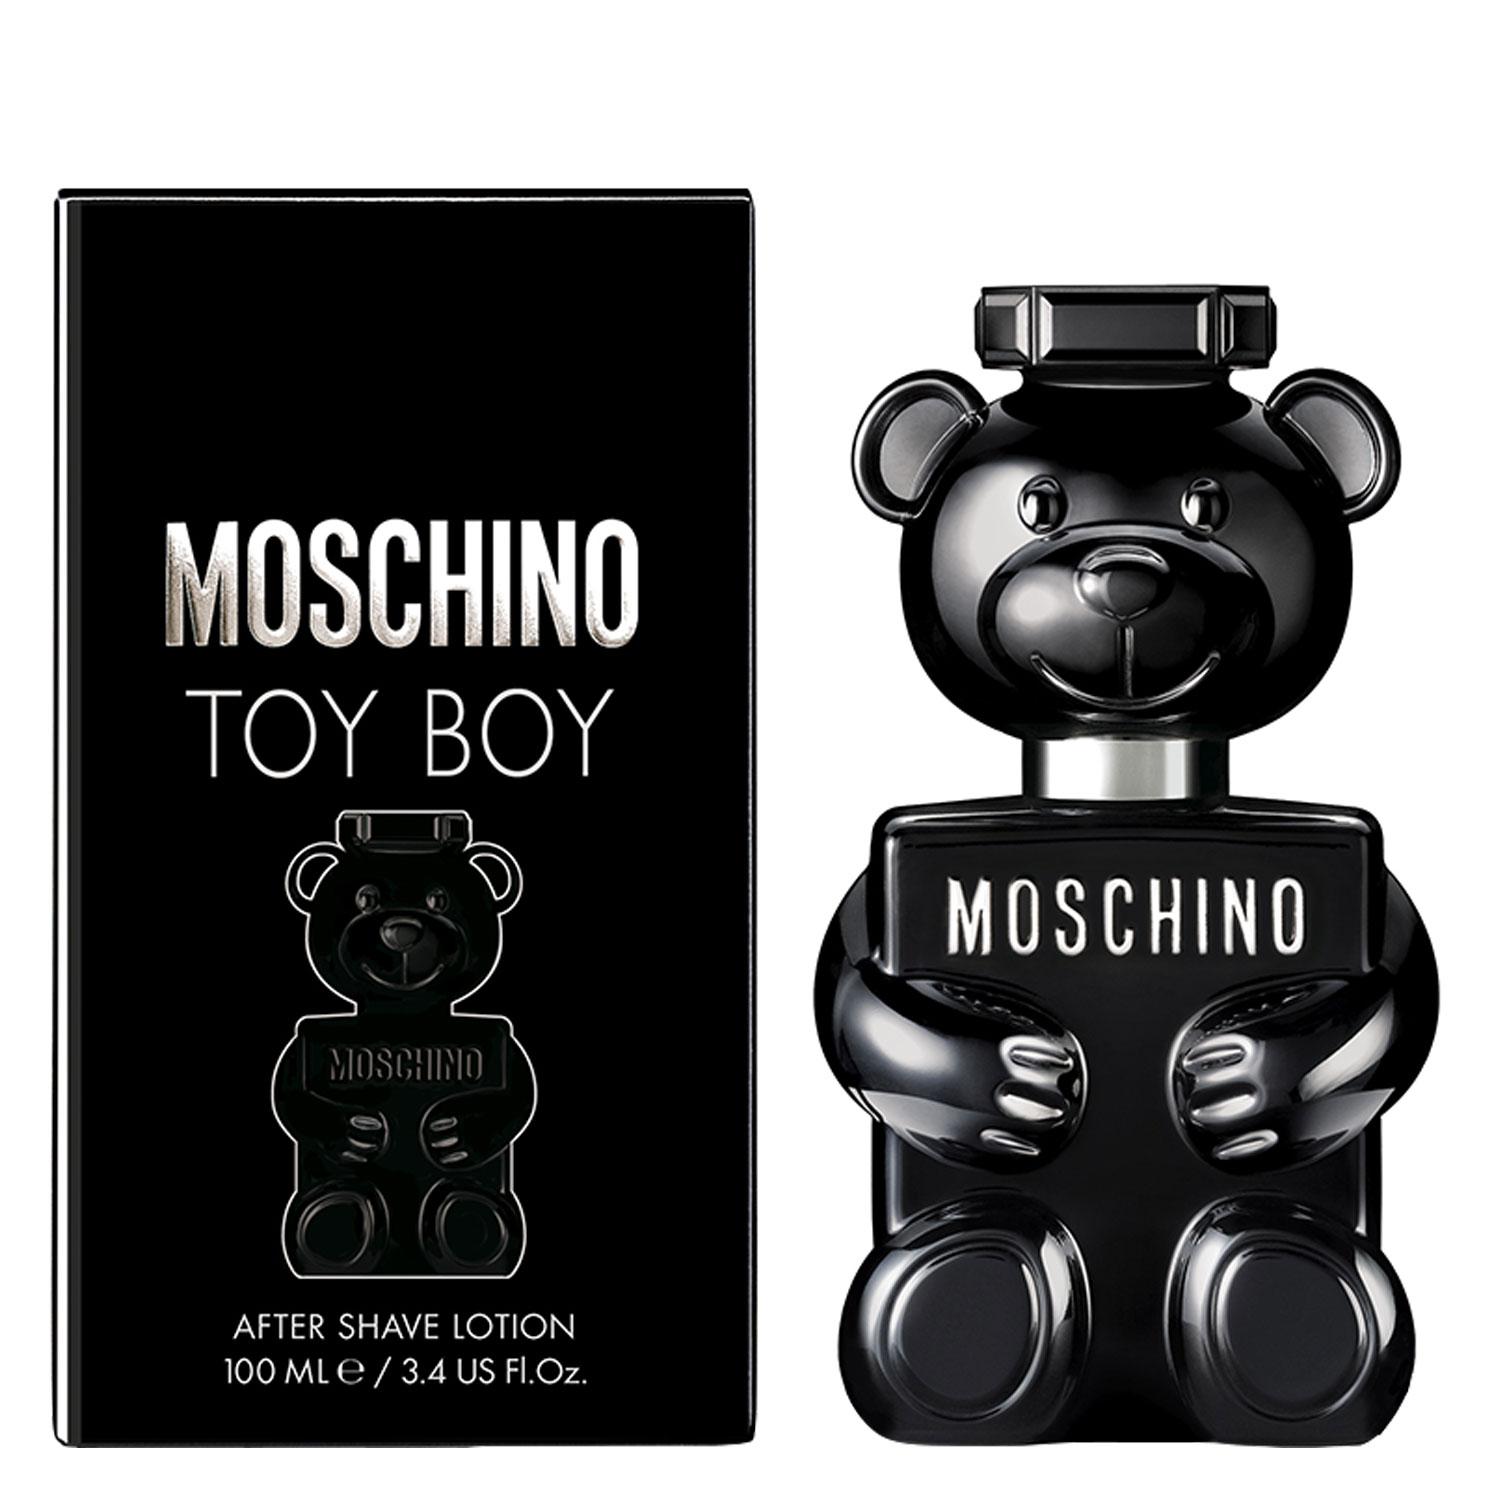 Toy Boy - After Shave Lotion Spray